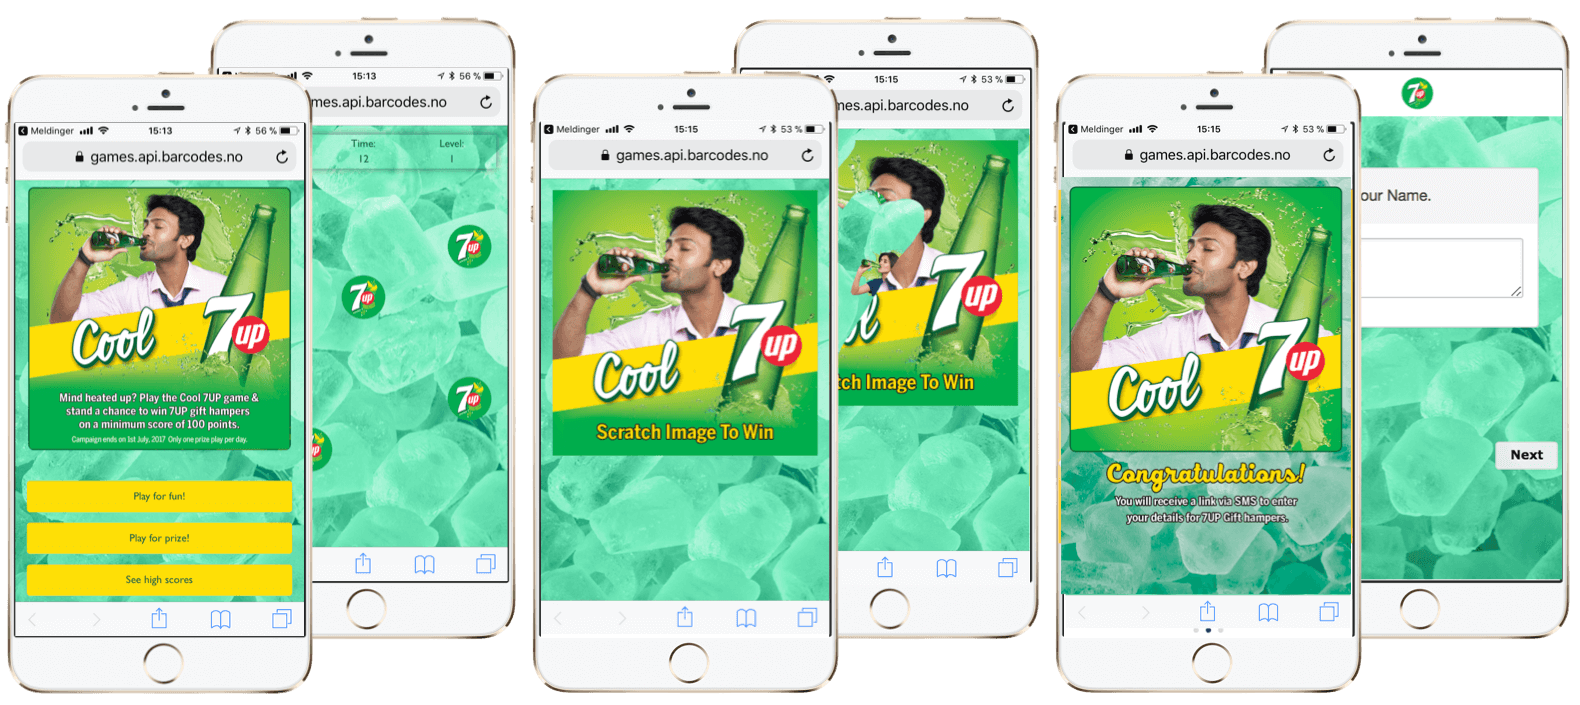 7Up in India